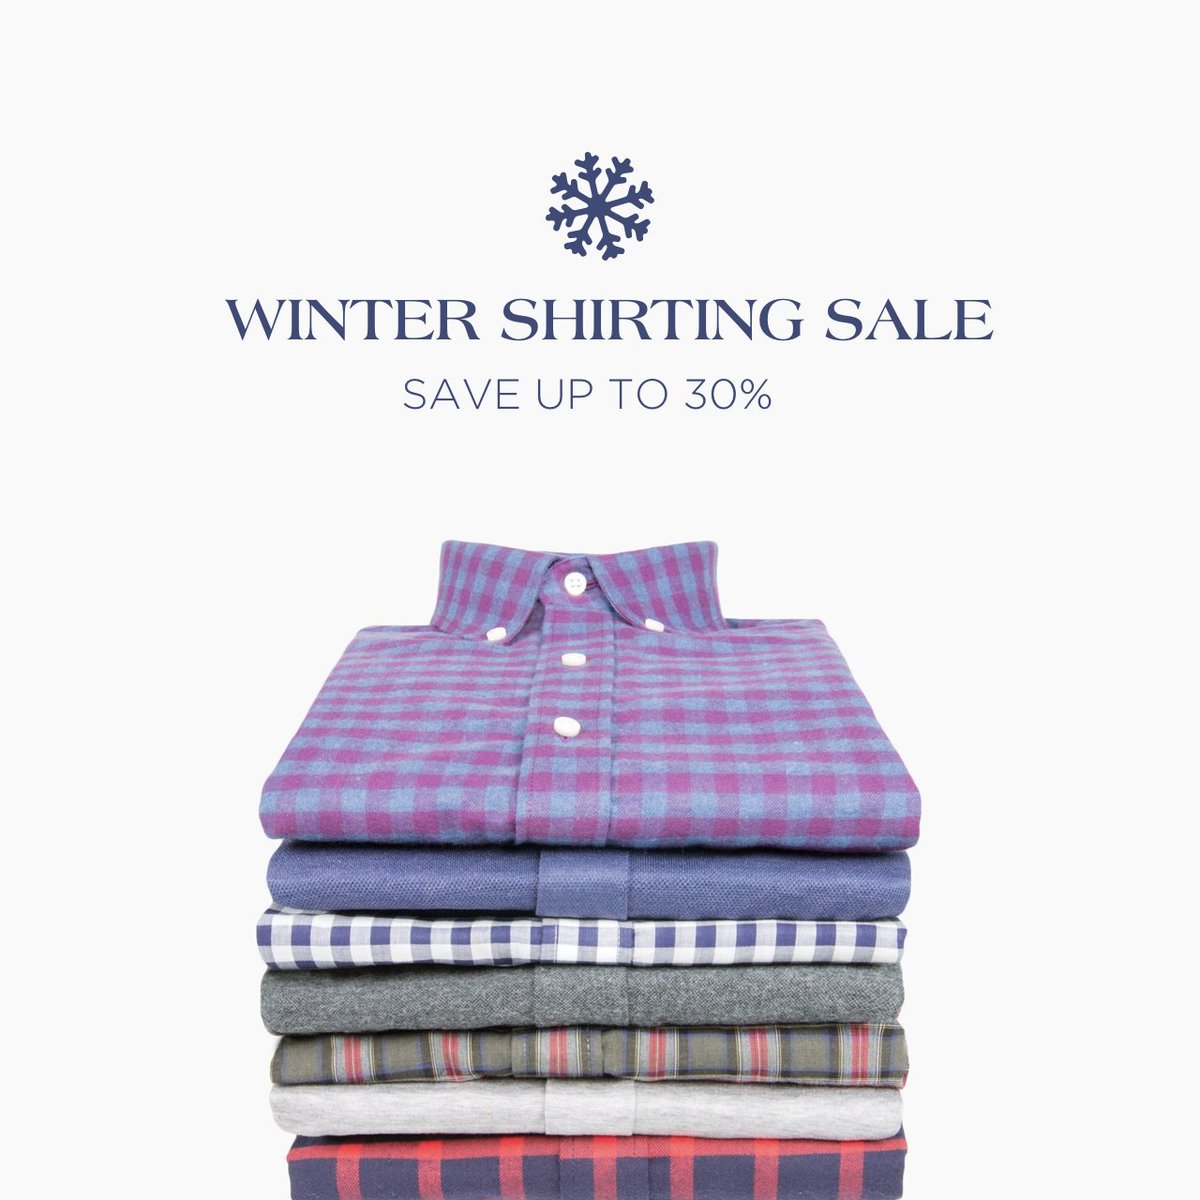 Now thru Sunday, save up to 30% on all shirts online or in-store! Buy 3 Shirts, Save 20% (Code: WINTER20) Buy 5 Shirts, Save 25% (Code: WINTER25) Buy 7 Shirts, Save 30% (Code: WINTER30) altonlane.com/shirts.html